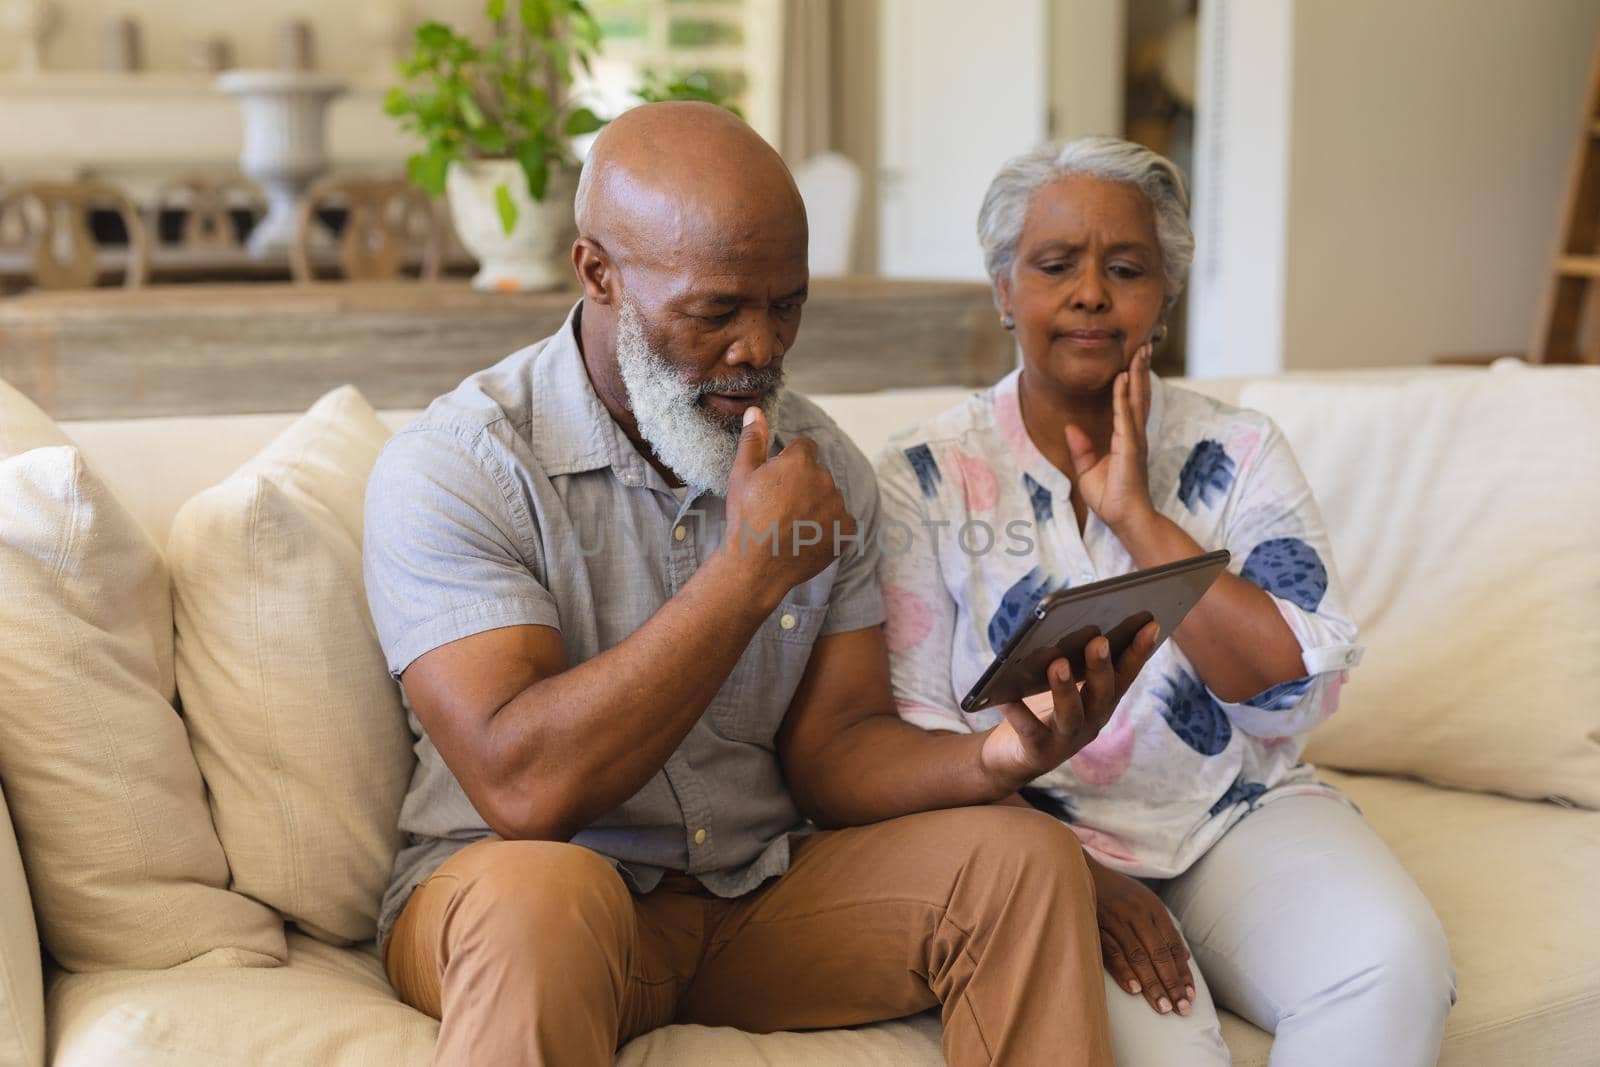 Senior african american couple sitting on sofa using tablet. retreat, retirement and happy senior lifestyle concept.